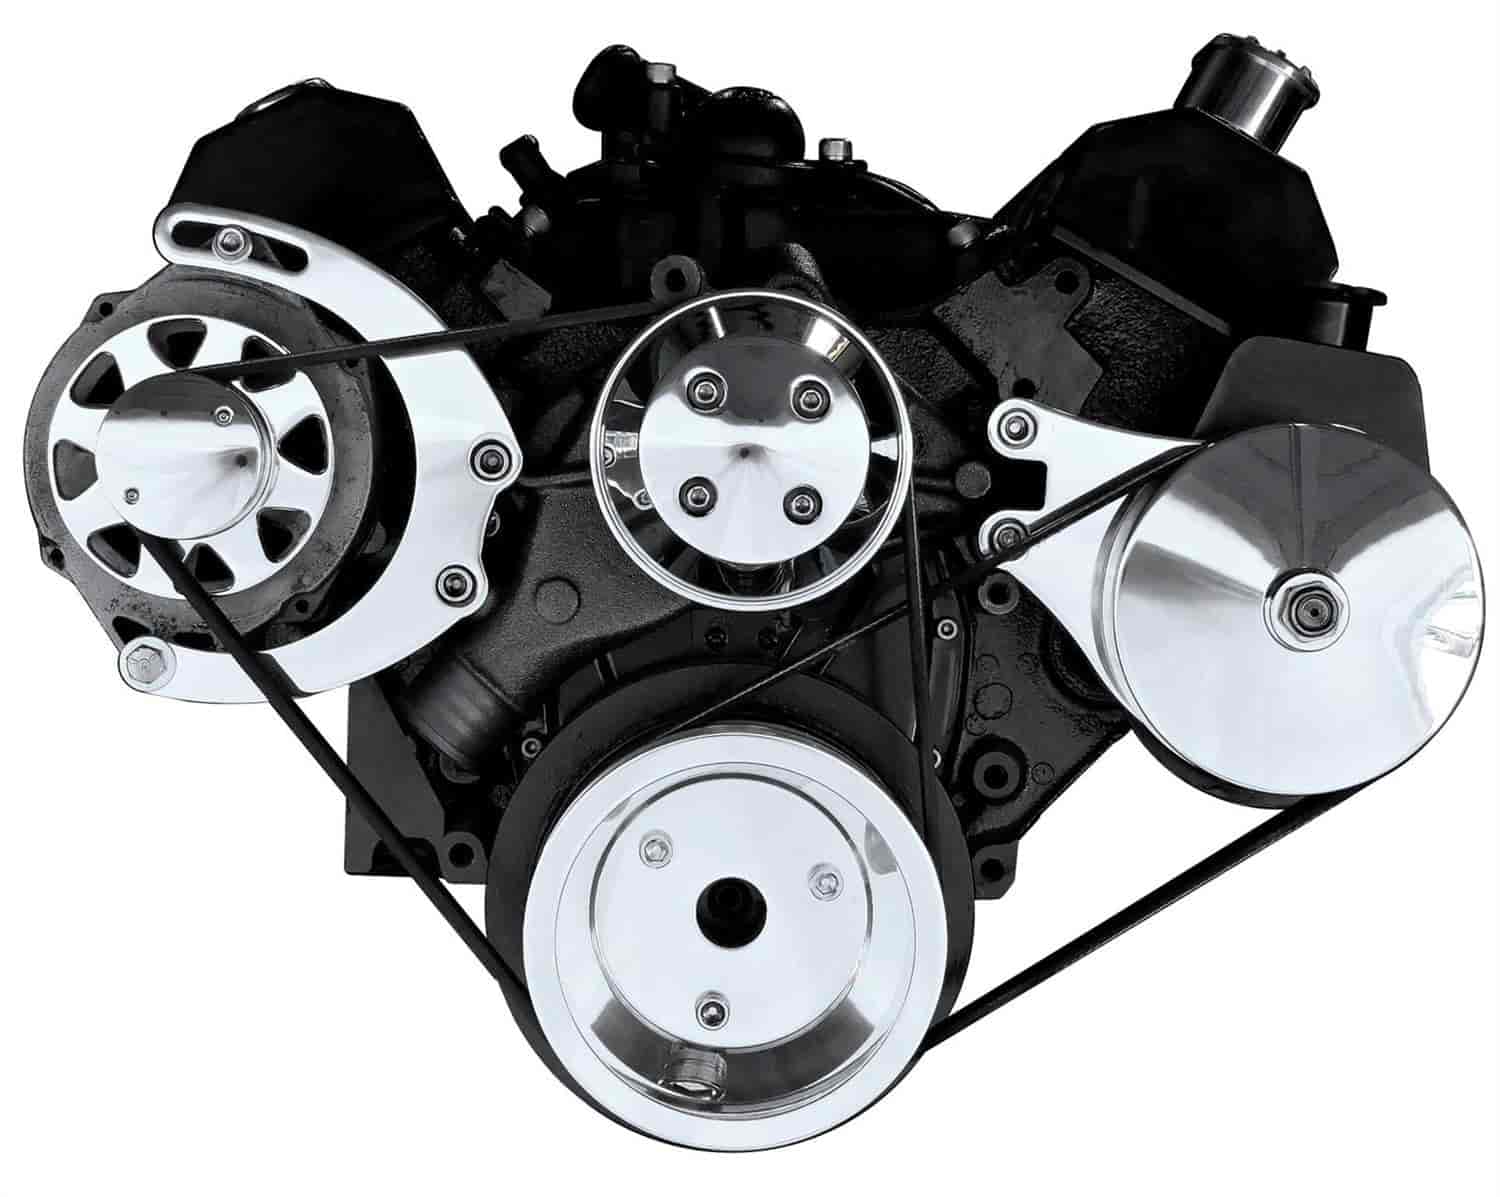 Serpentine Conversion Kit for Small Block Chevy [Polished]